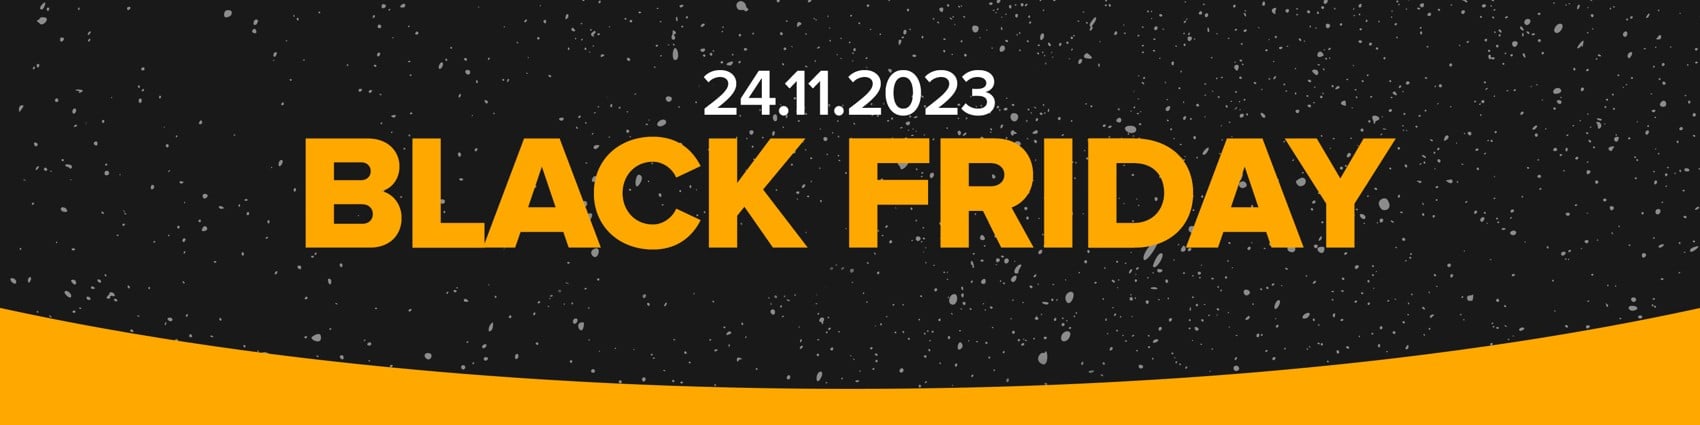 Black Friday 2023 | The best »Black Friday deals« of the year